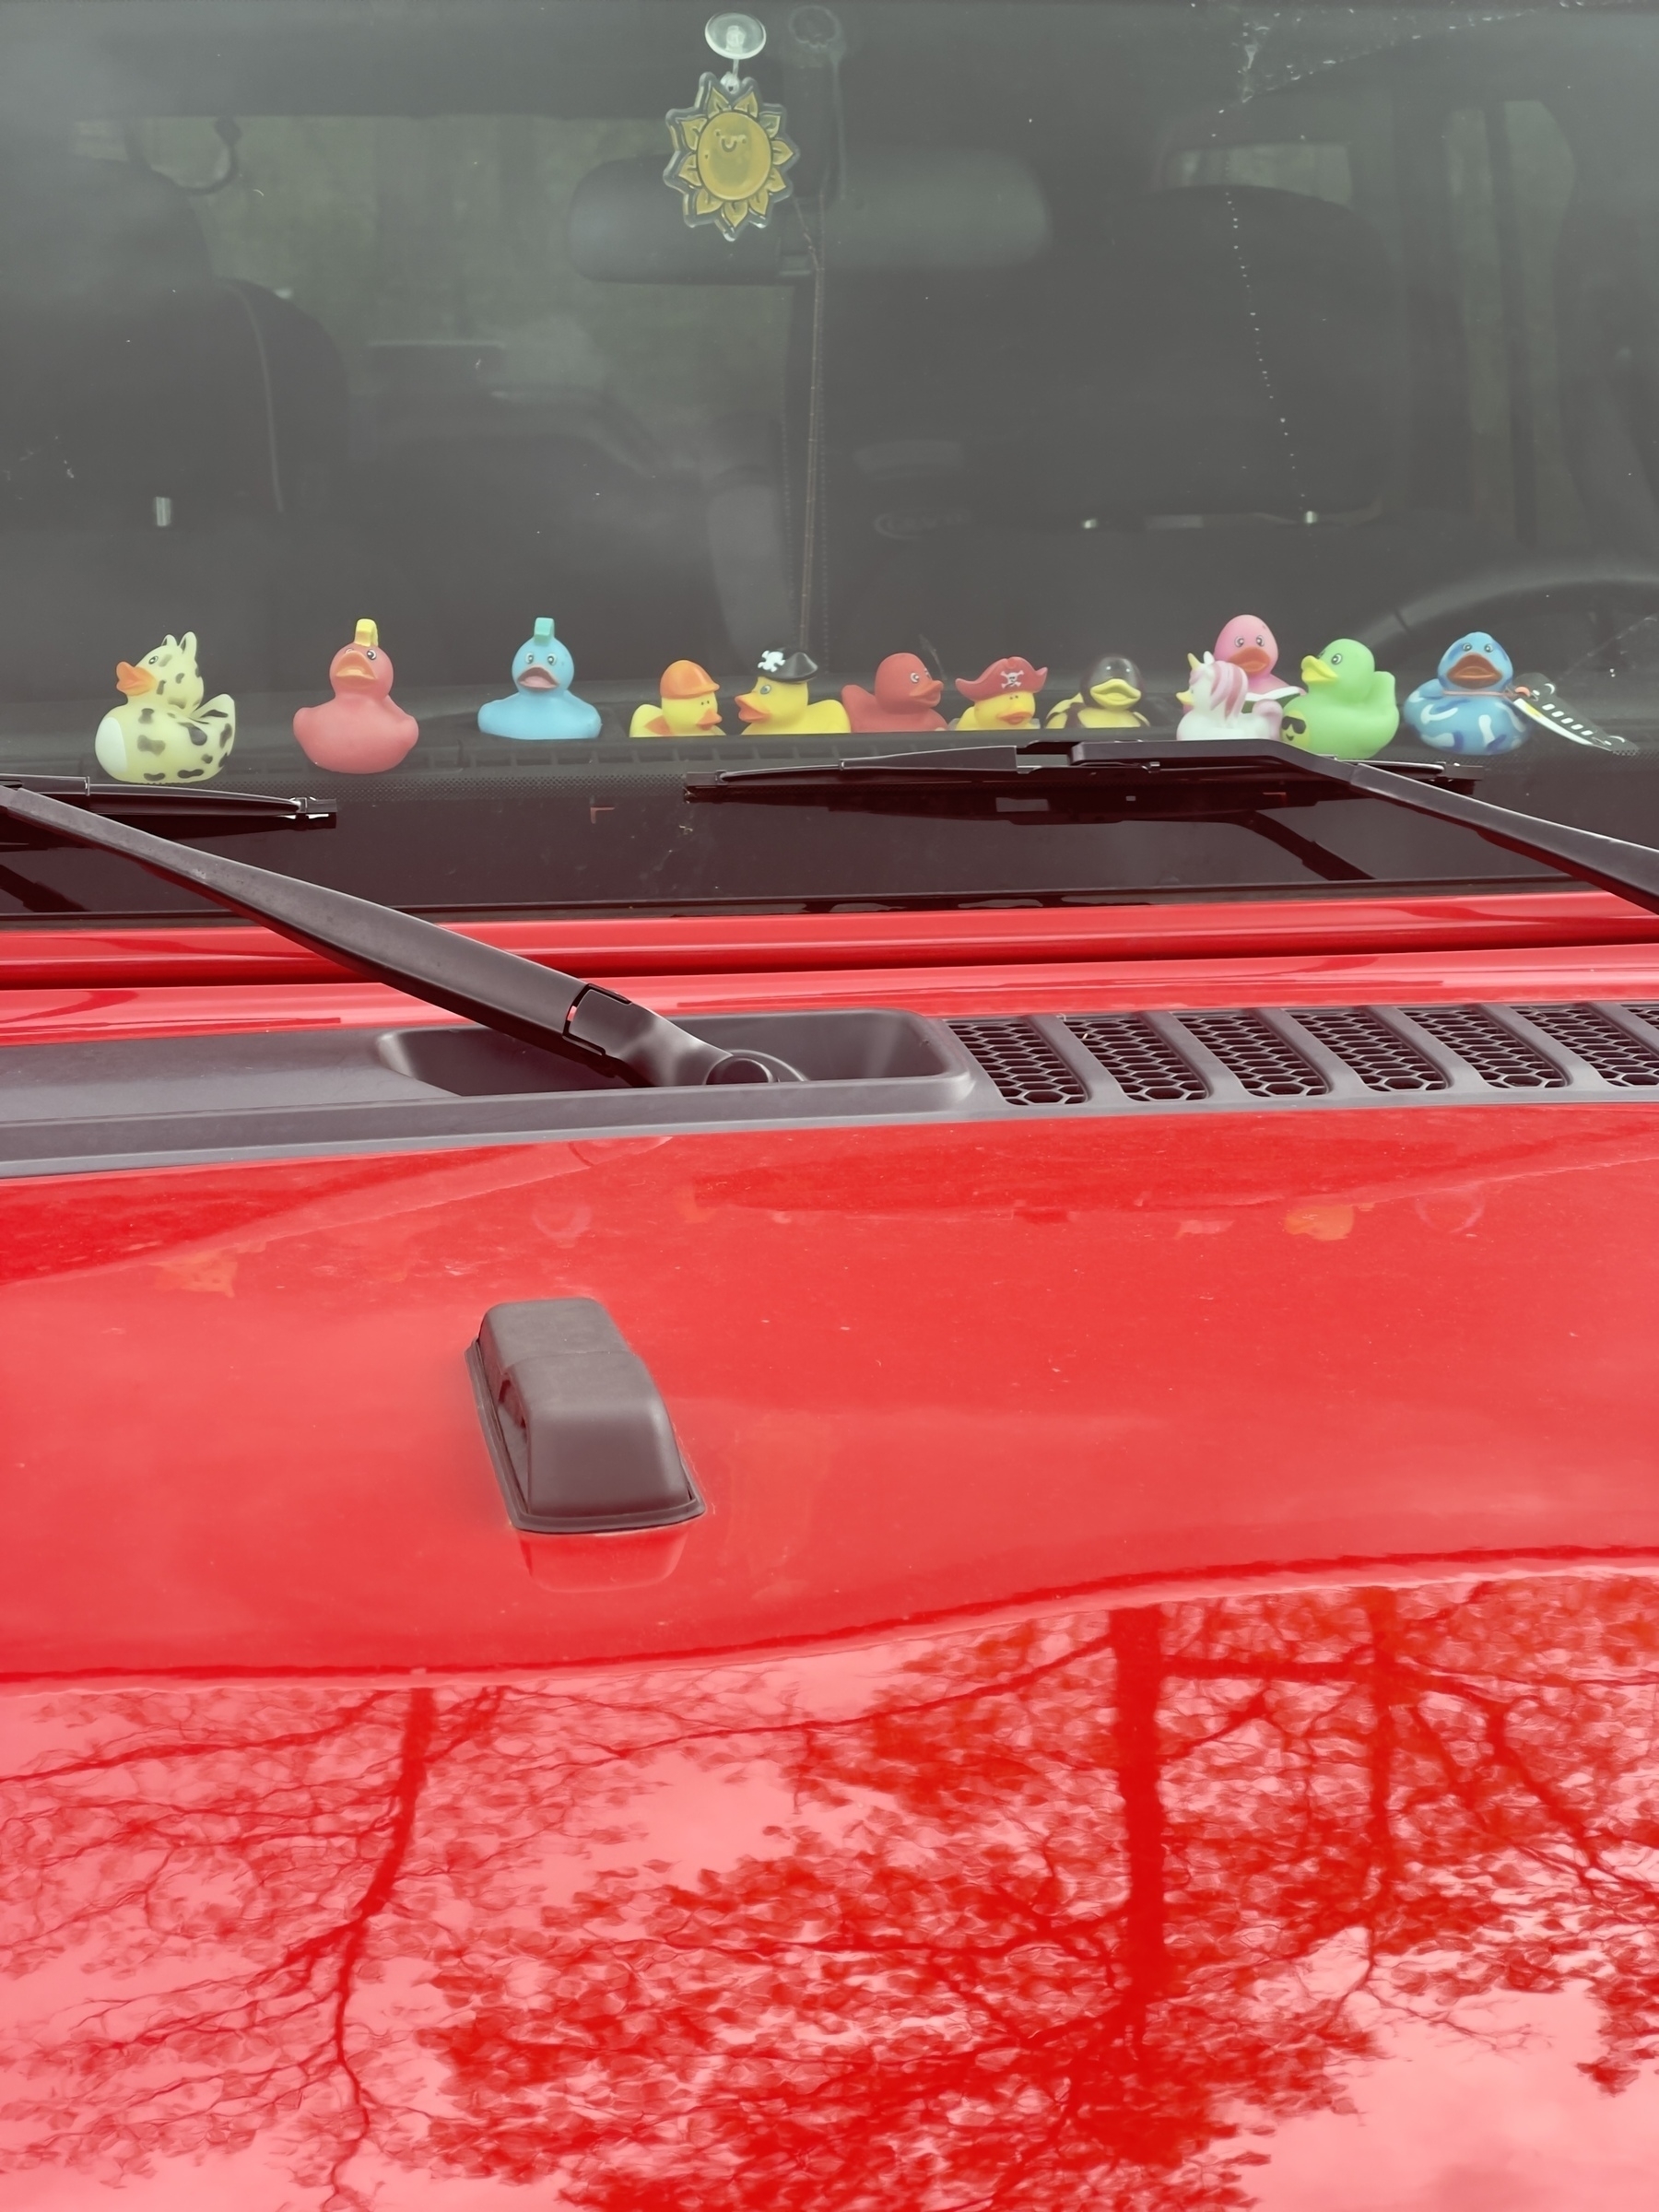 Rubber ducks all in a row on the dashboard of a red Jeep.